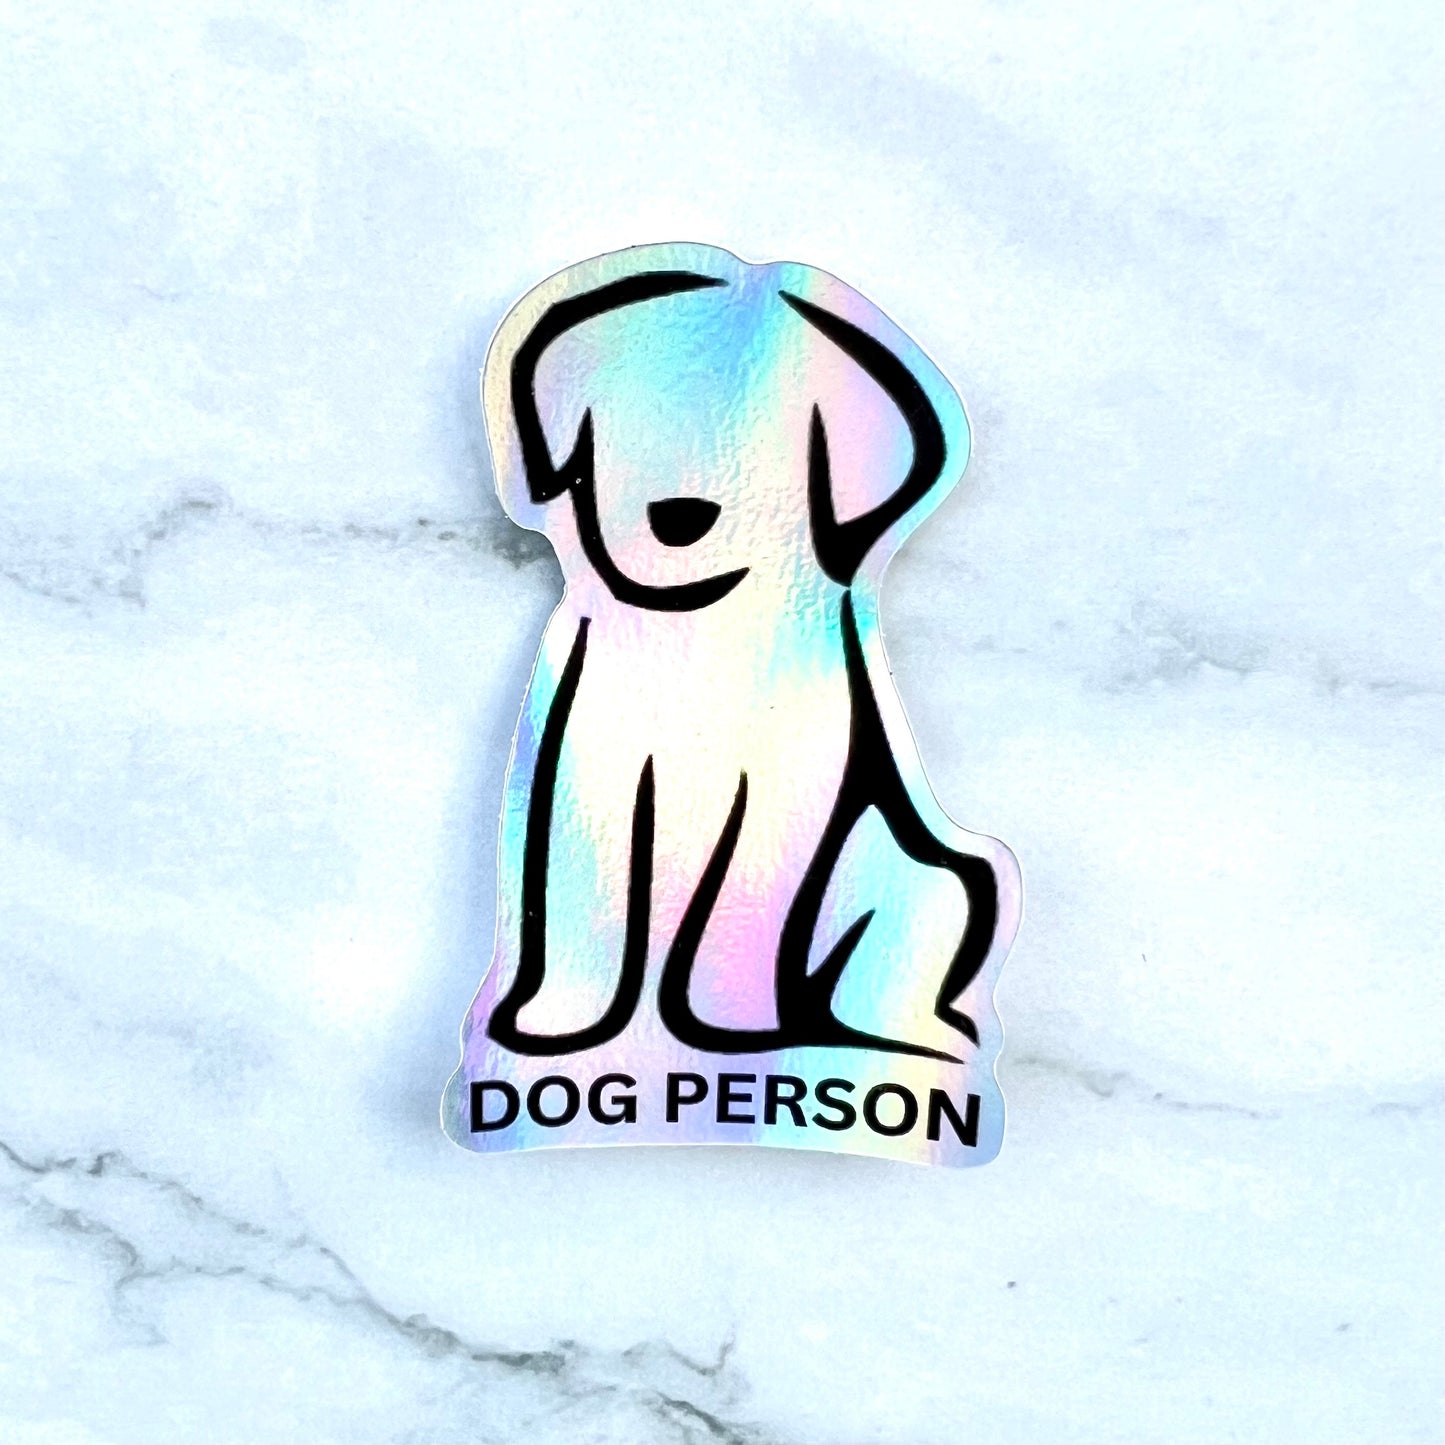 holographic sticker of a minimalist black line drawing of a dog, "DOG PERSON"